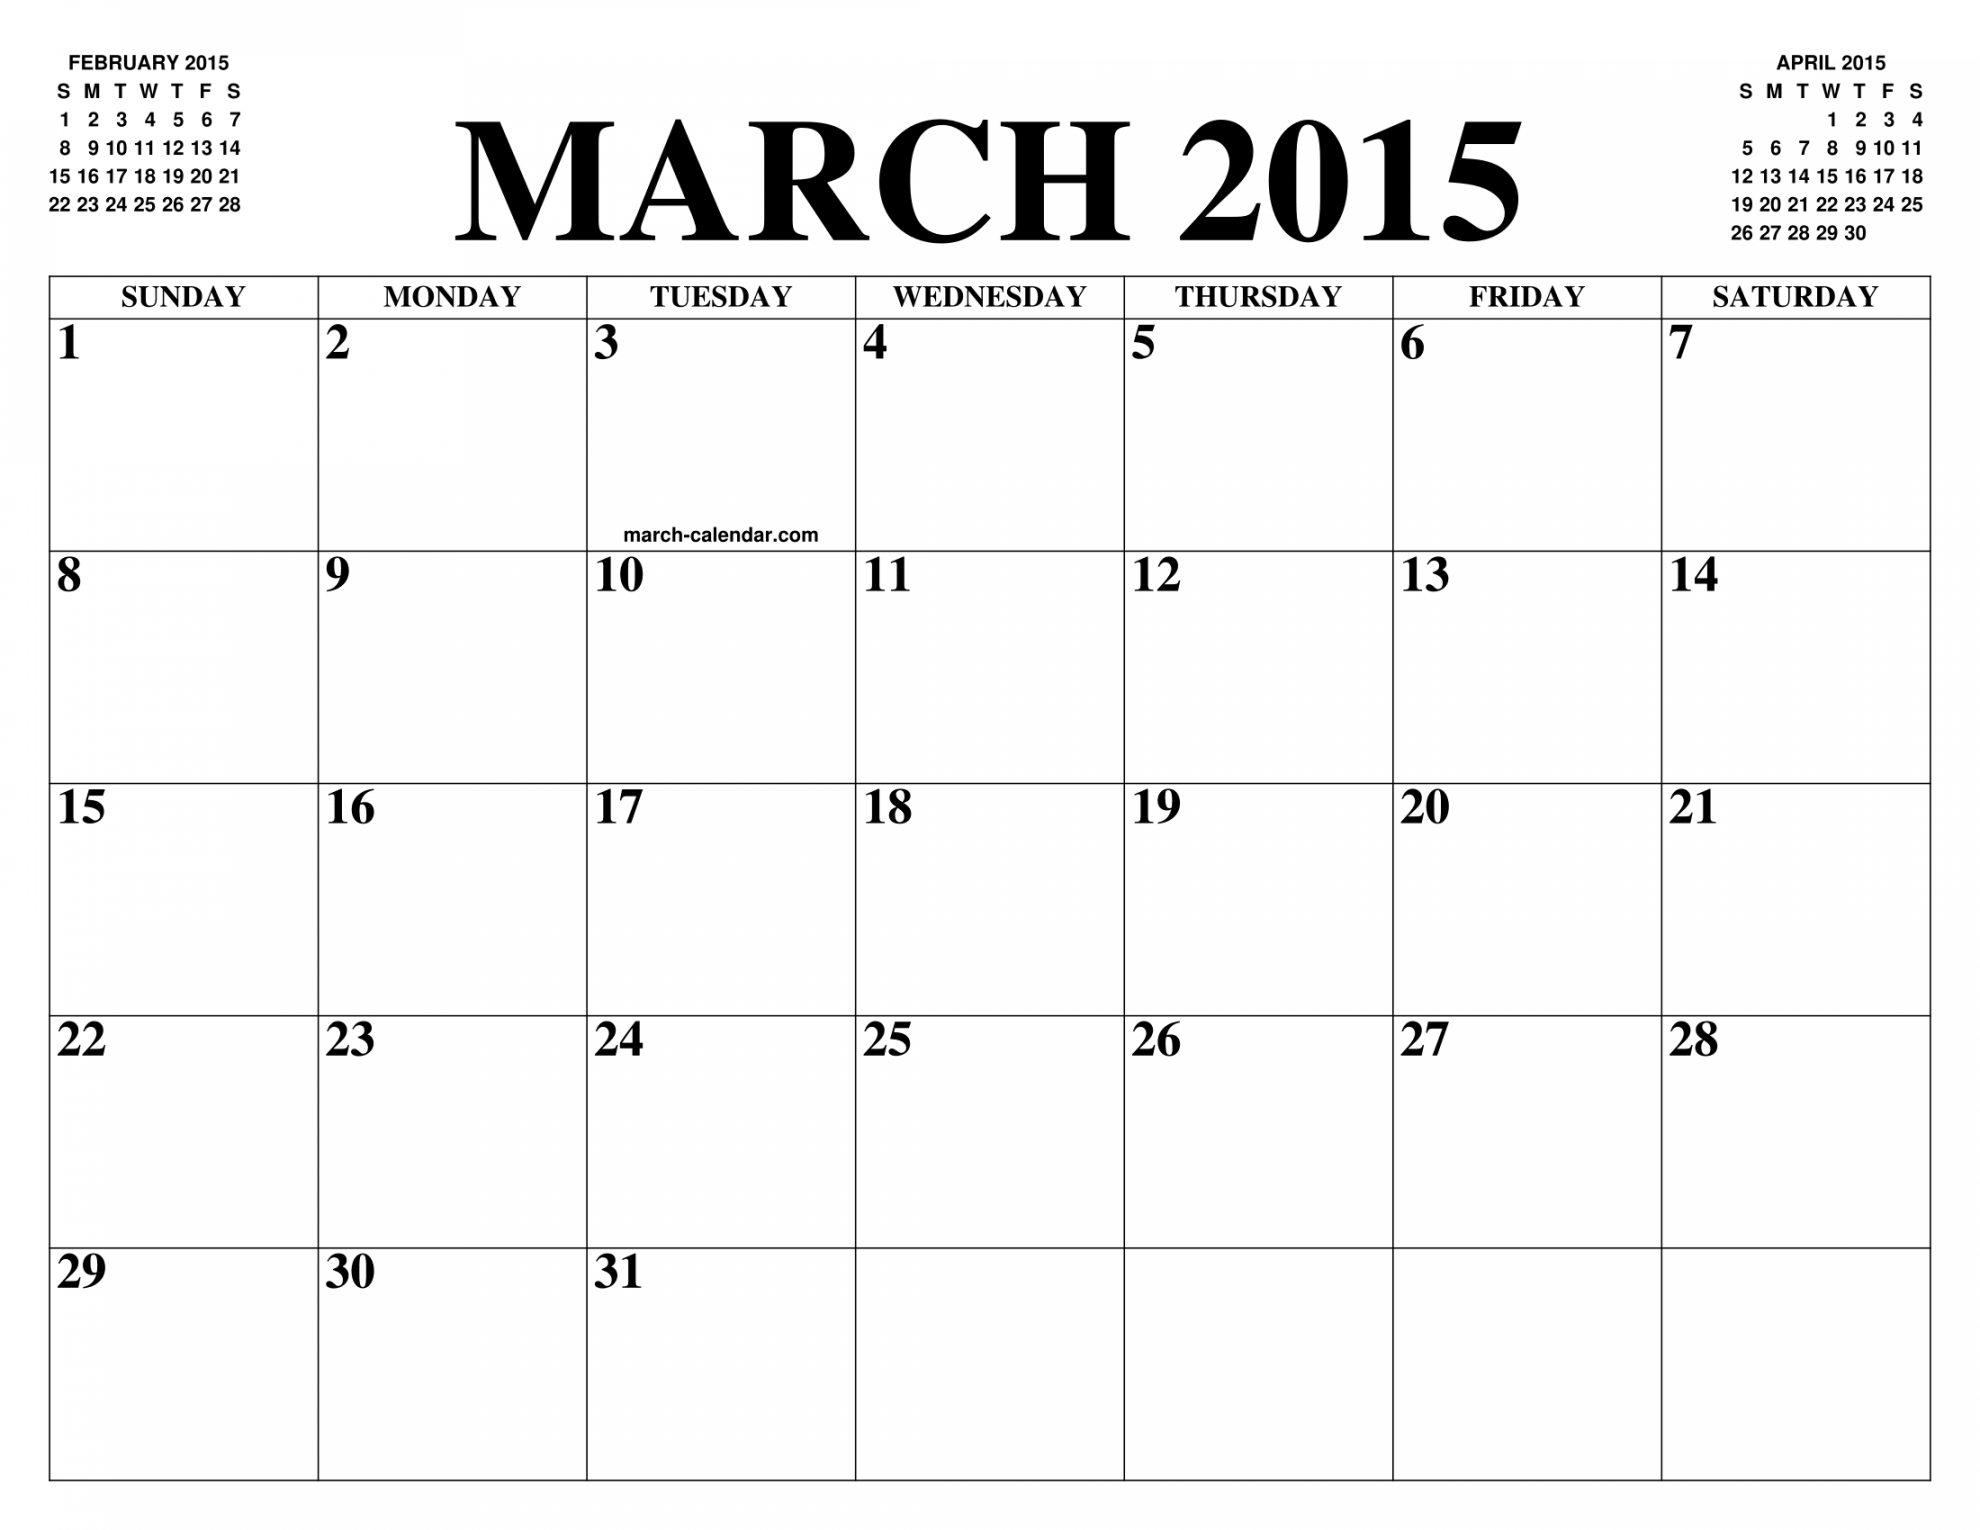 MARCH CALENDAR OF THE MONTH: FREE PRINTABLE MARCH CALENDAR OF